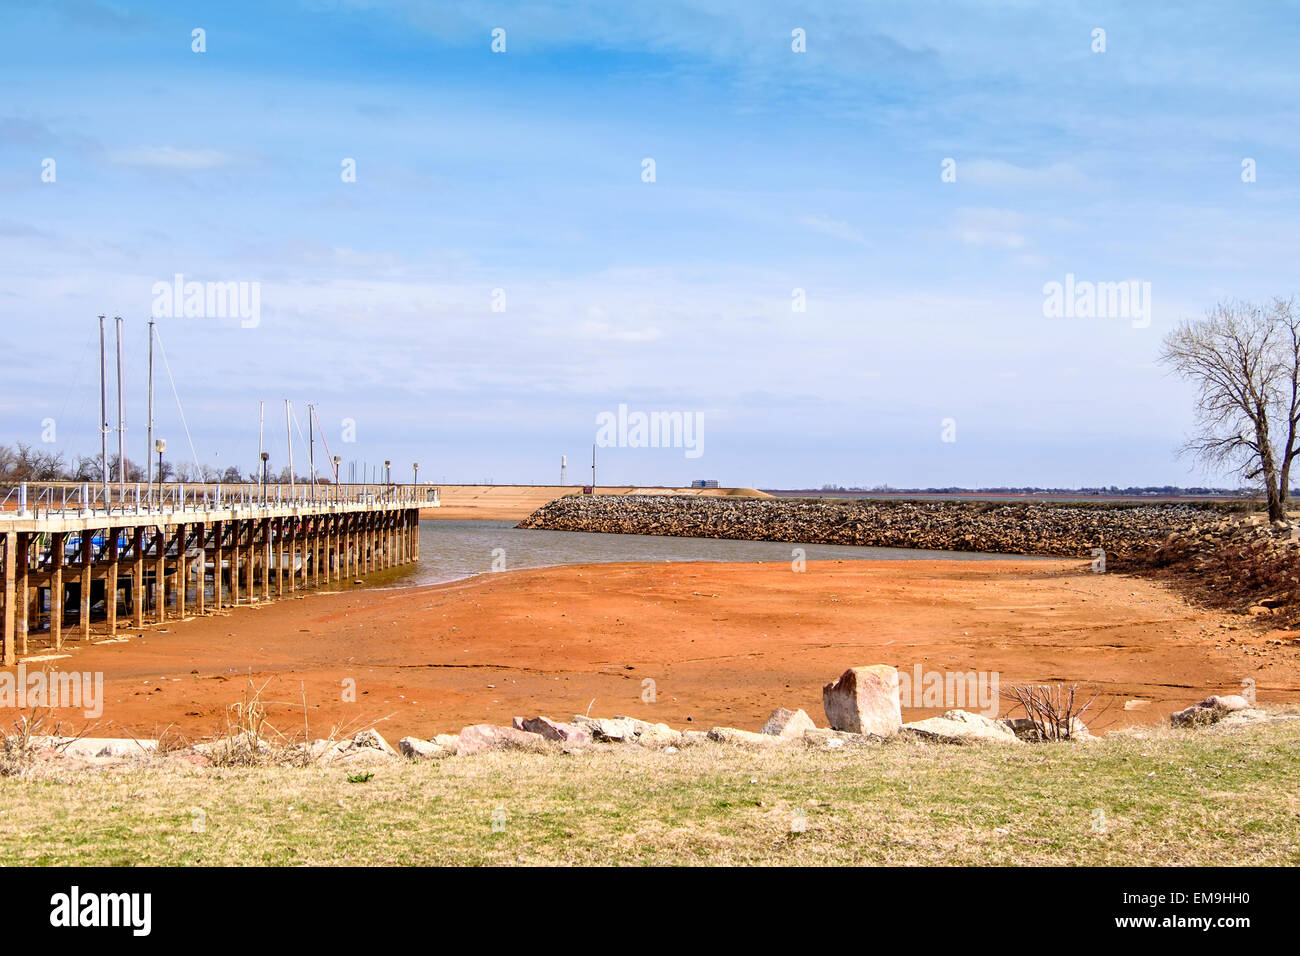 Low water reveals a dry lake bed in the marina of a drought-stricken municipal water supply, Lake Hefner, In Oklahoma City, Oklahoma, USA. Stock Photo